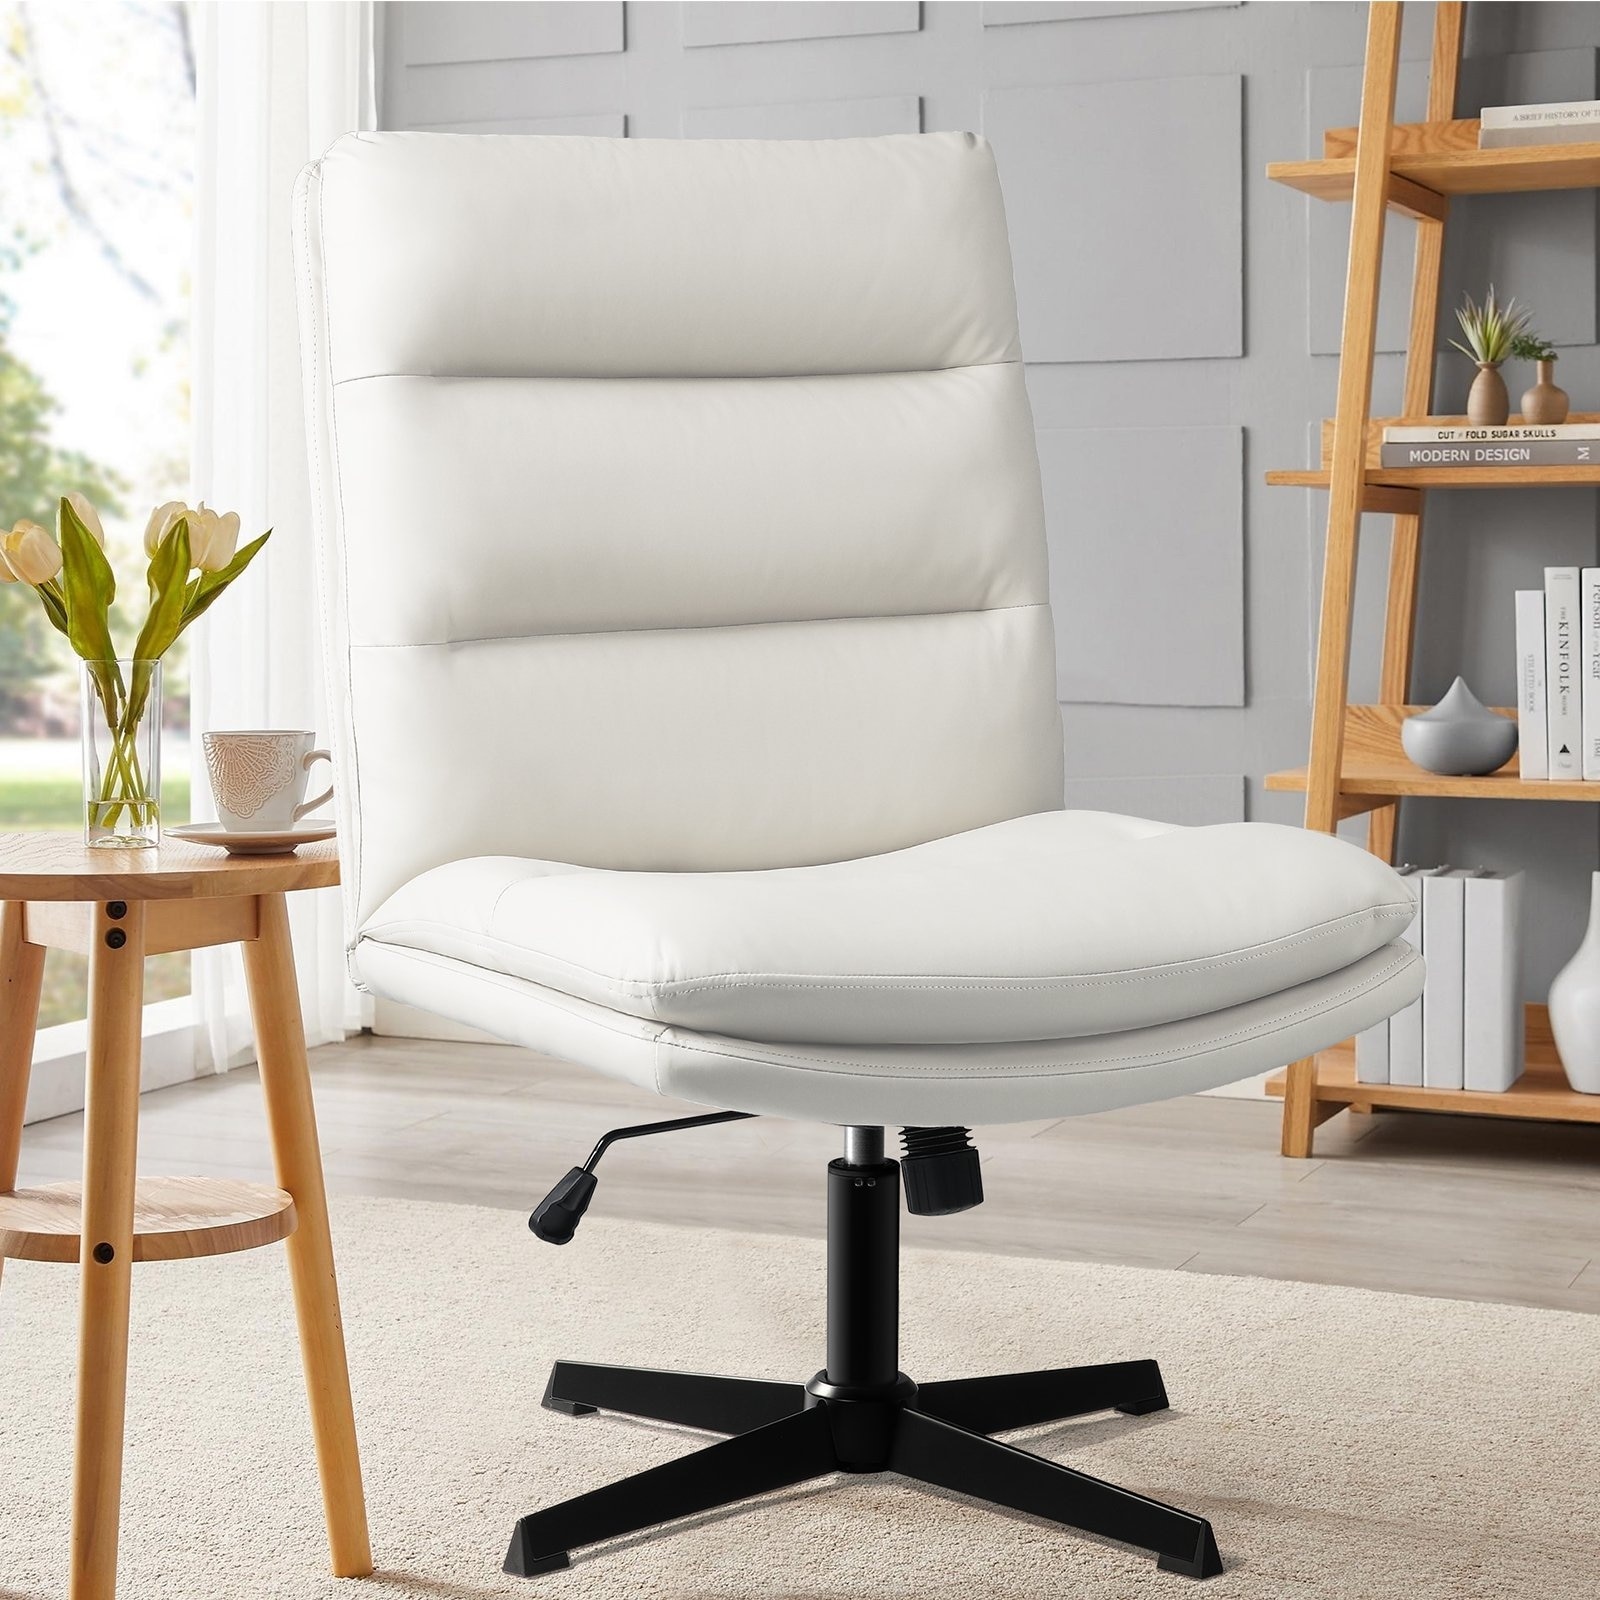 https://ak1.ostkcdn.com/images/products/is/images/direct/05819b02878b7b5eac0e9348998531239c7aca45/Bossin-Armless-Office-Desk-Chair-No-Wheels%2CPU-Leather-Criss-Cross-Legged-Chair-for-Home-Office%2C-High-Back-Computer-Desk-Chair.jpg